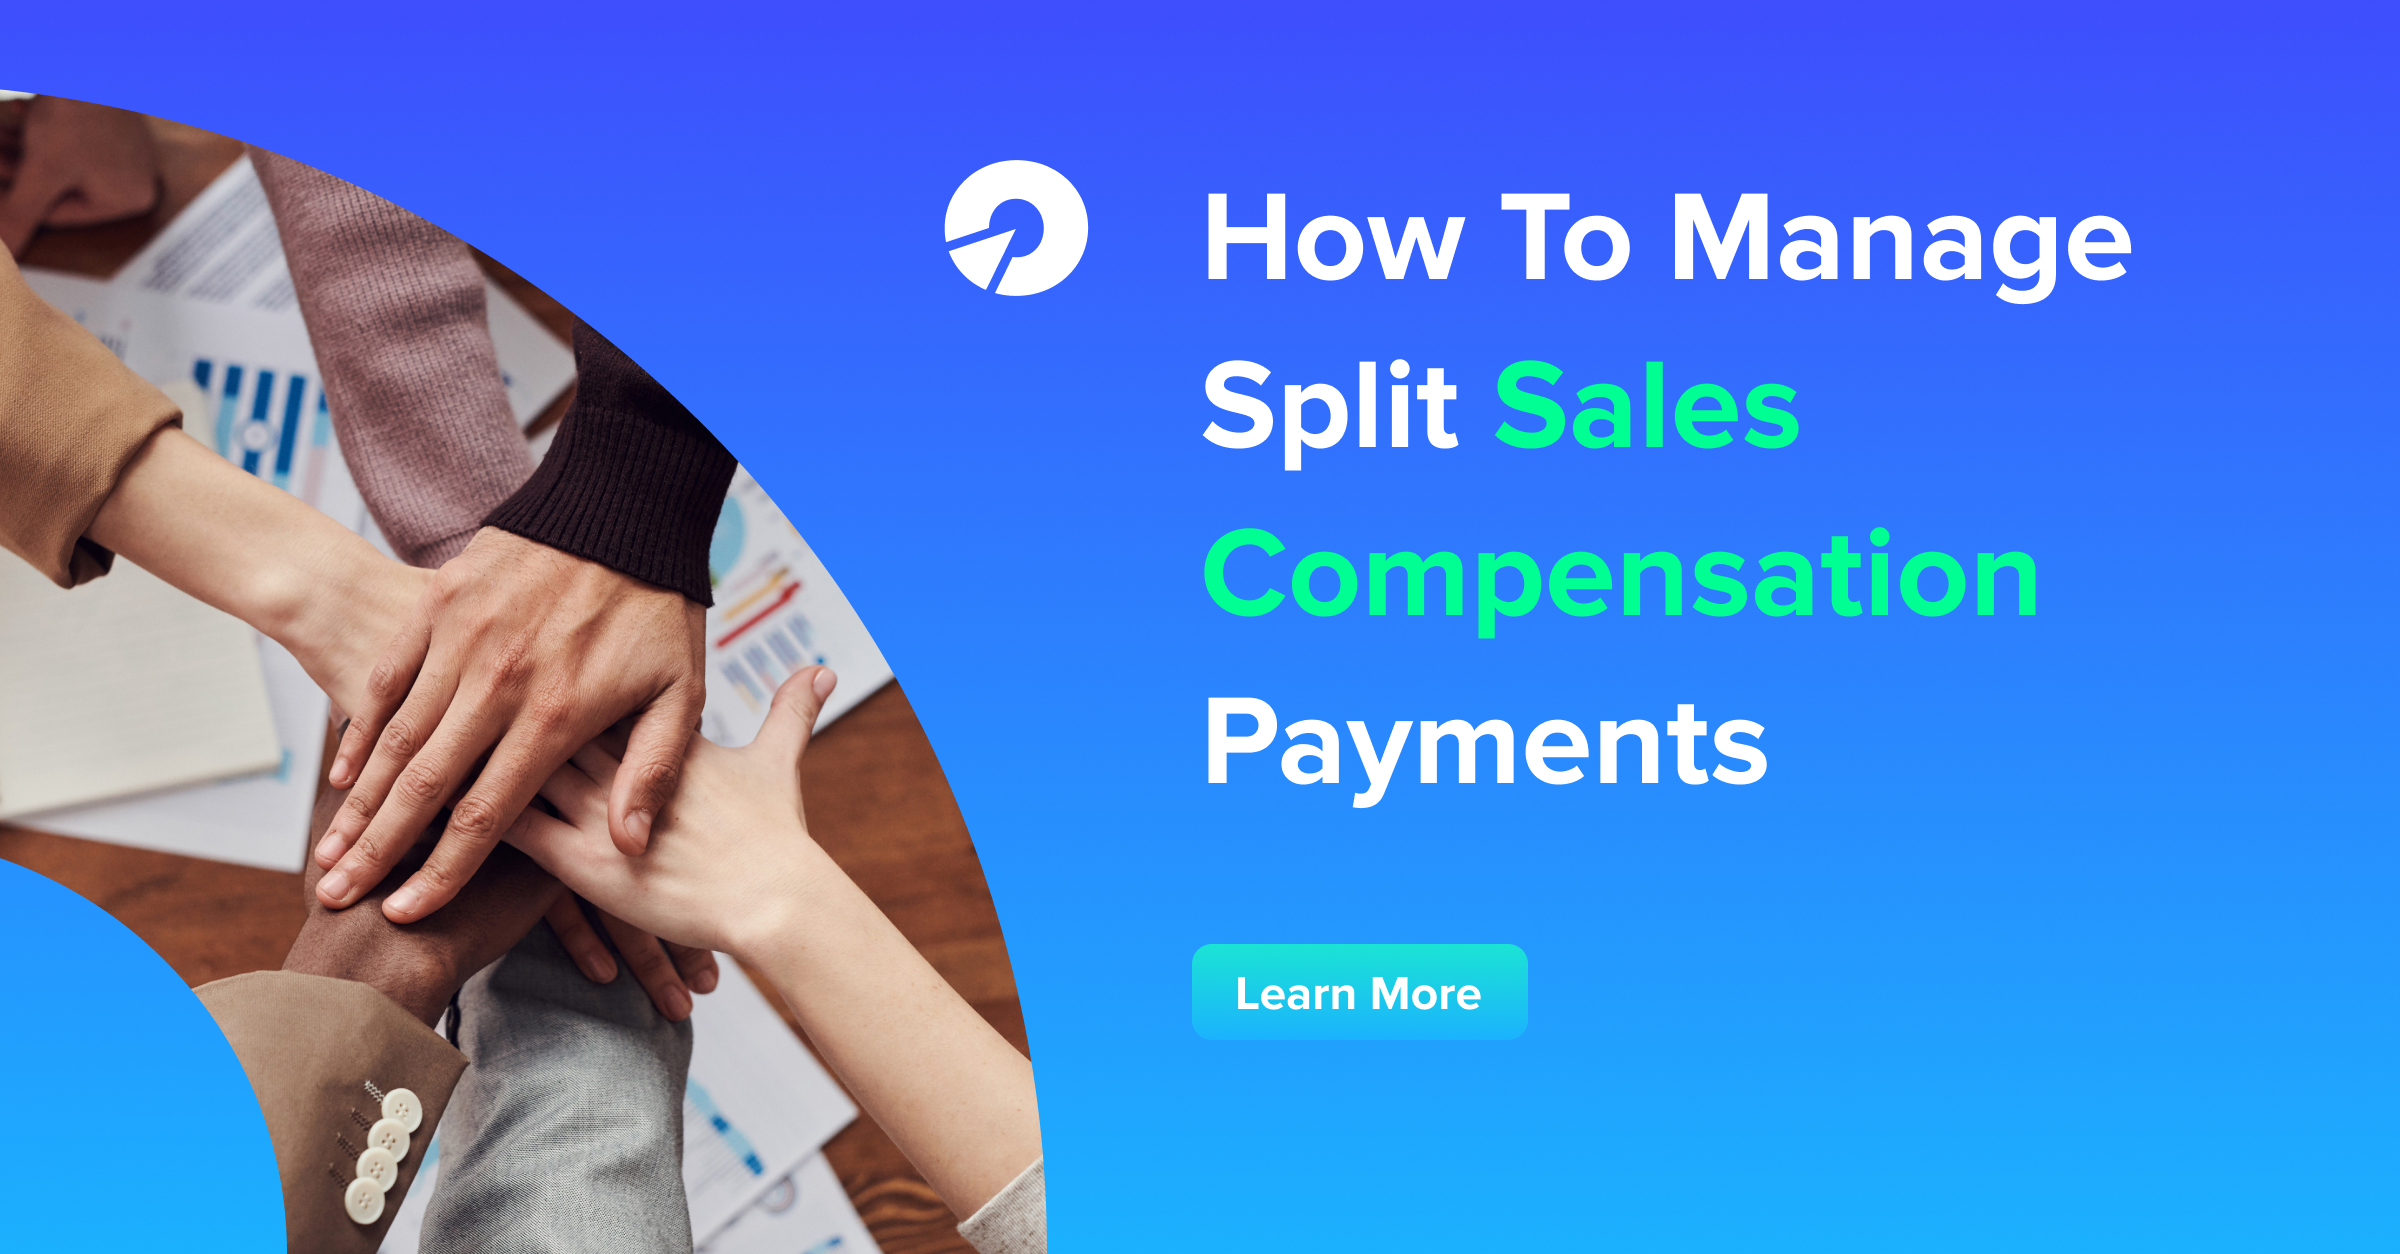 How To Manage Split Sales Compensation Payments